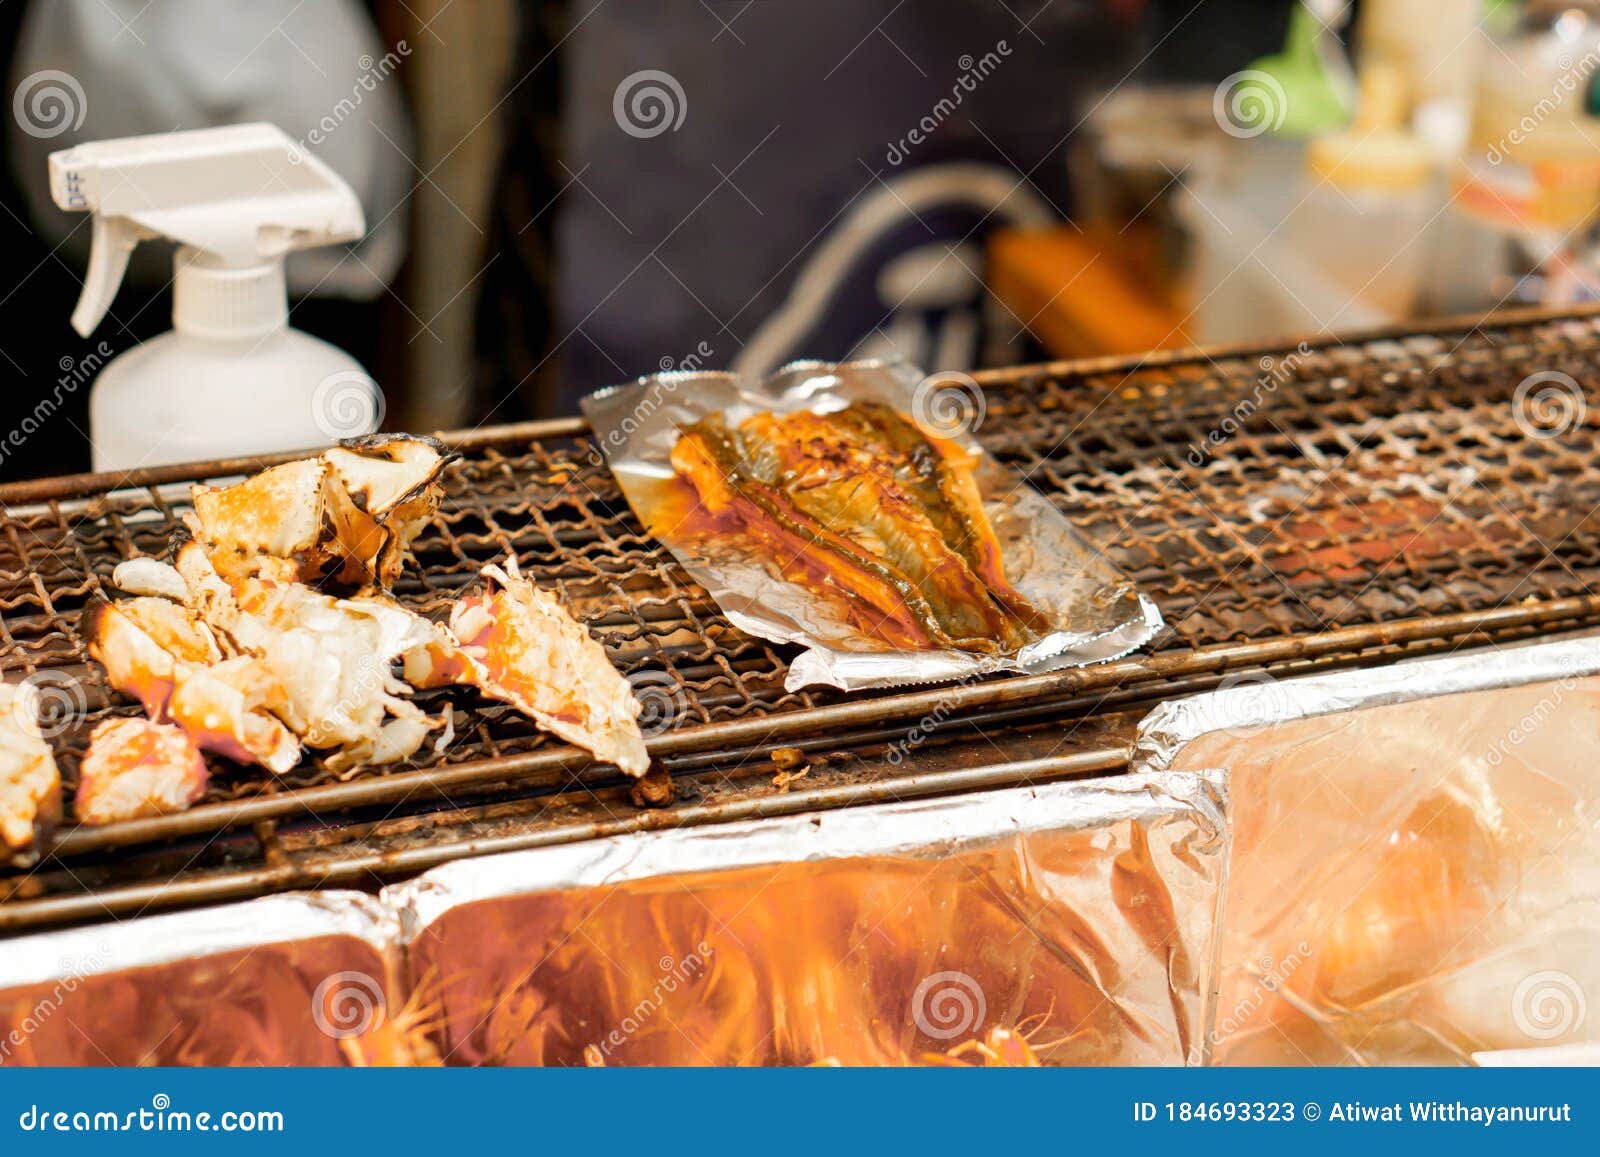 King Crab Legs And Grilled Japanese Eels Fish On Stove